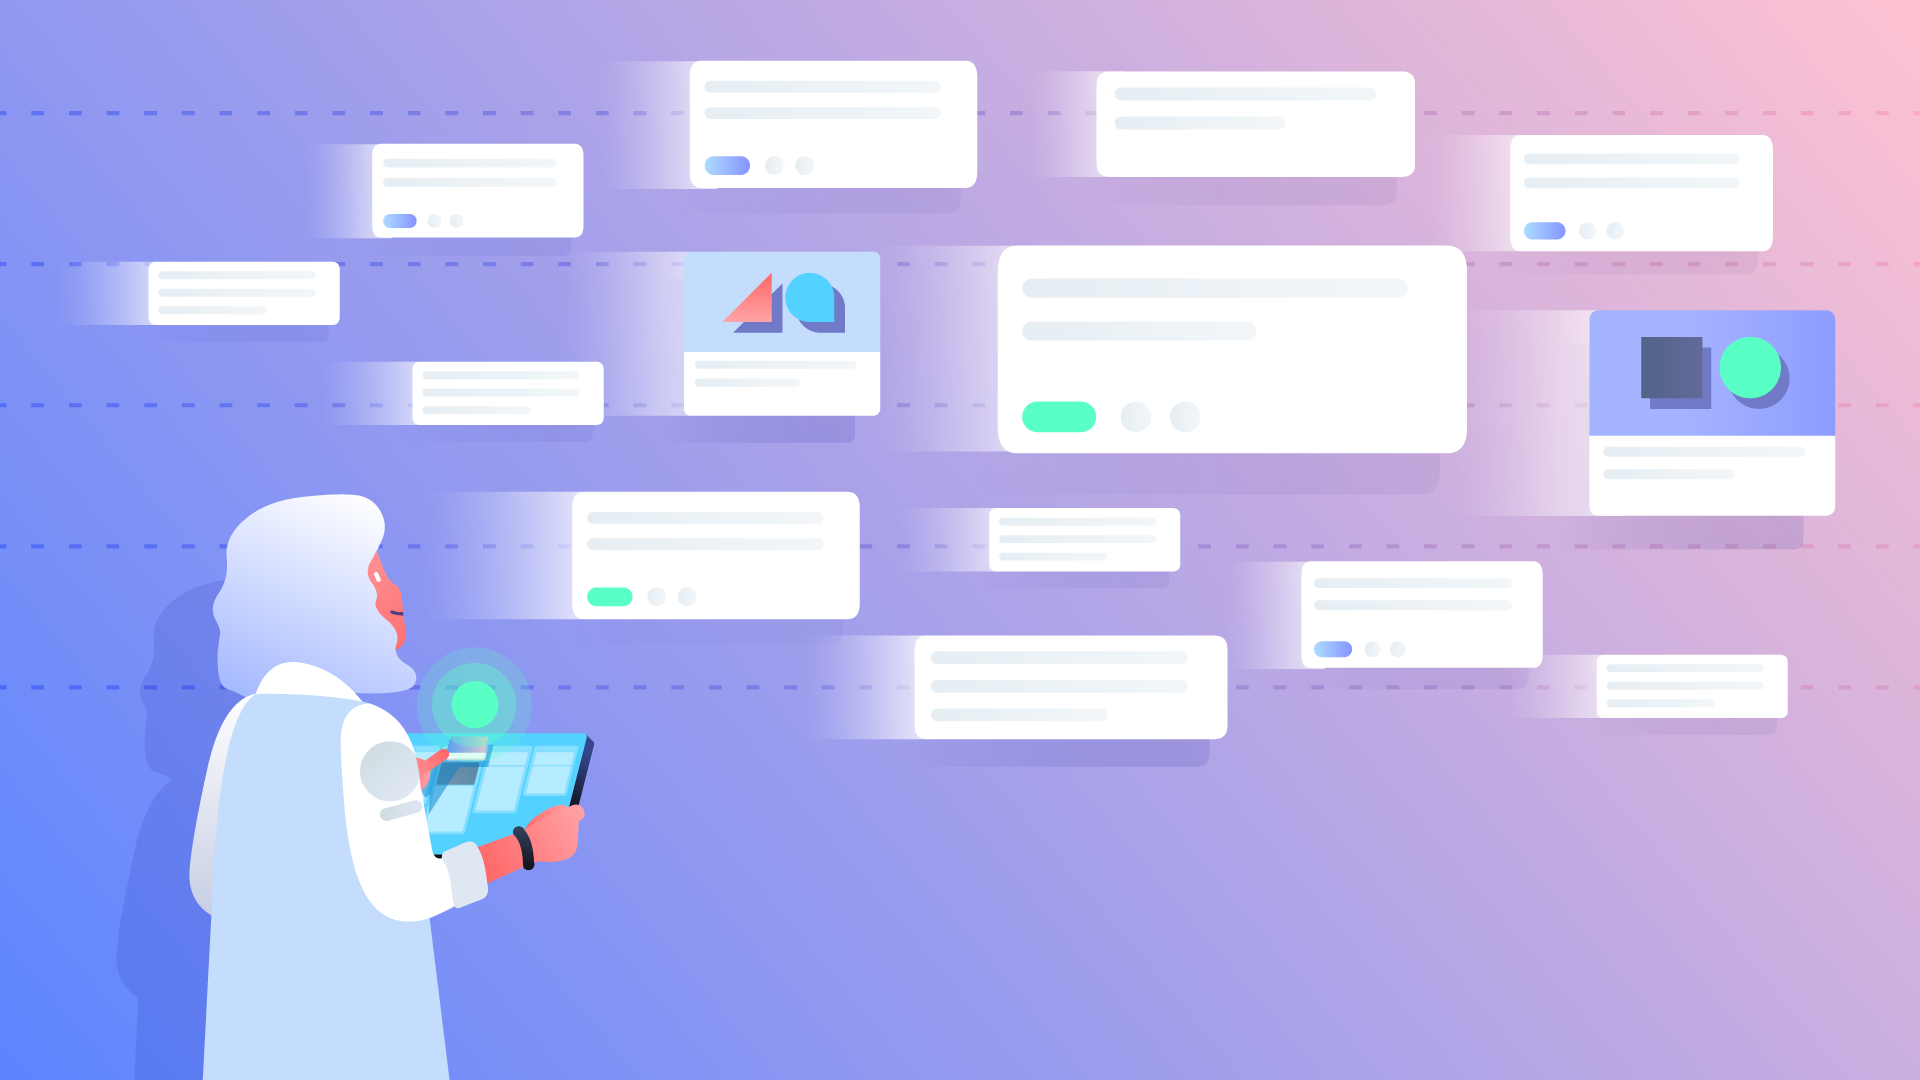 How To Use Trello For Project Management: Expert Tips & Tricks